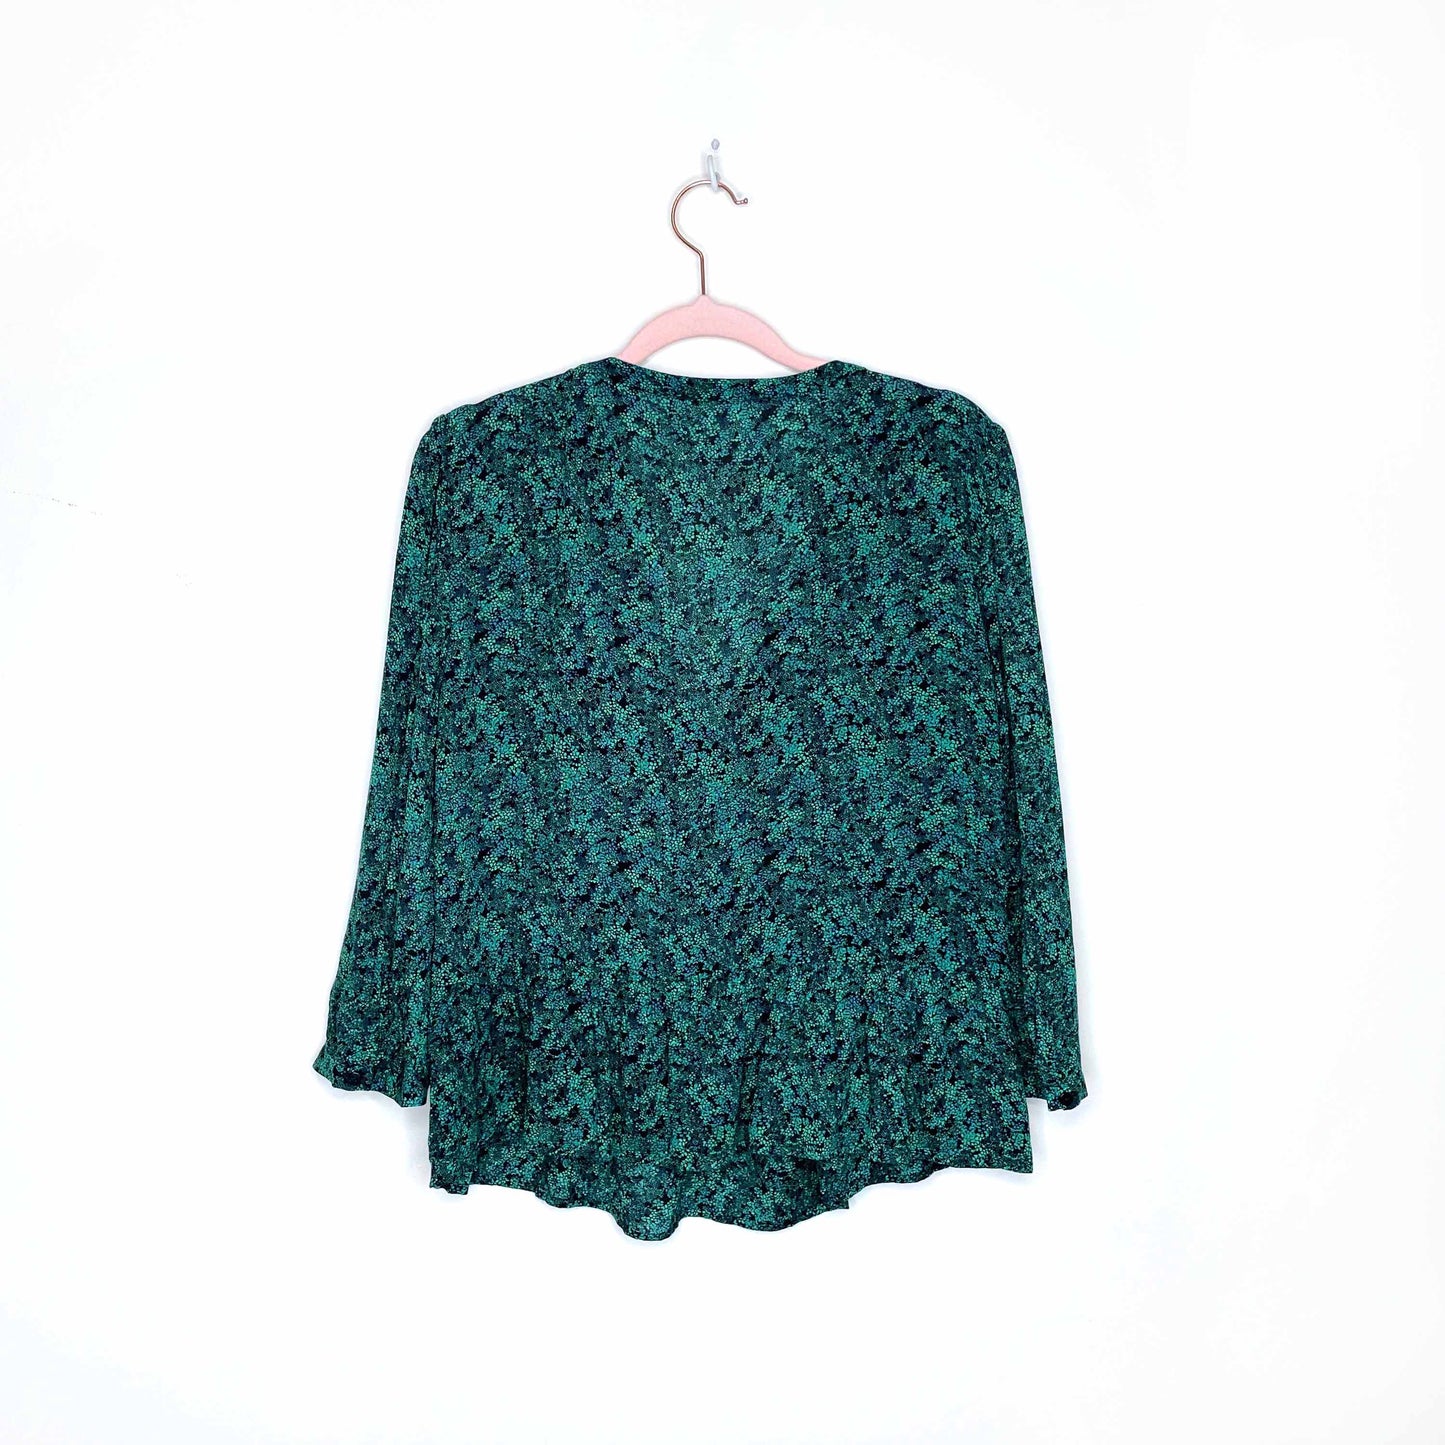 ba&sh nelly top vert floral peasant blouse - size large